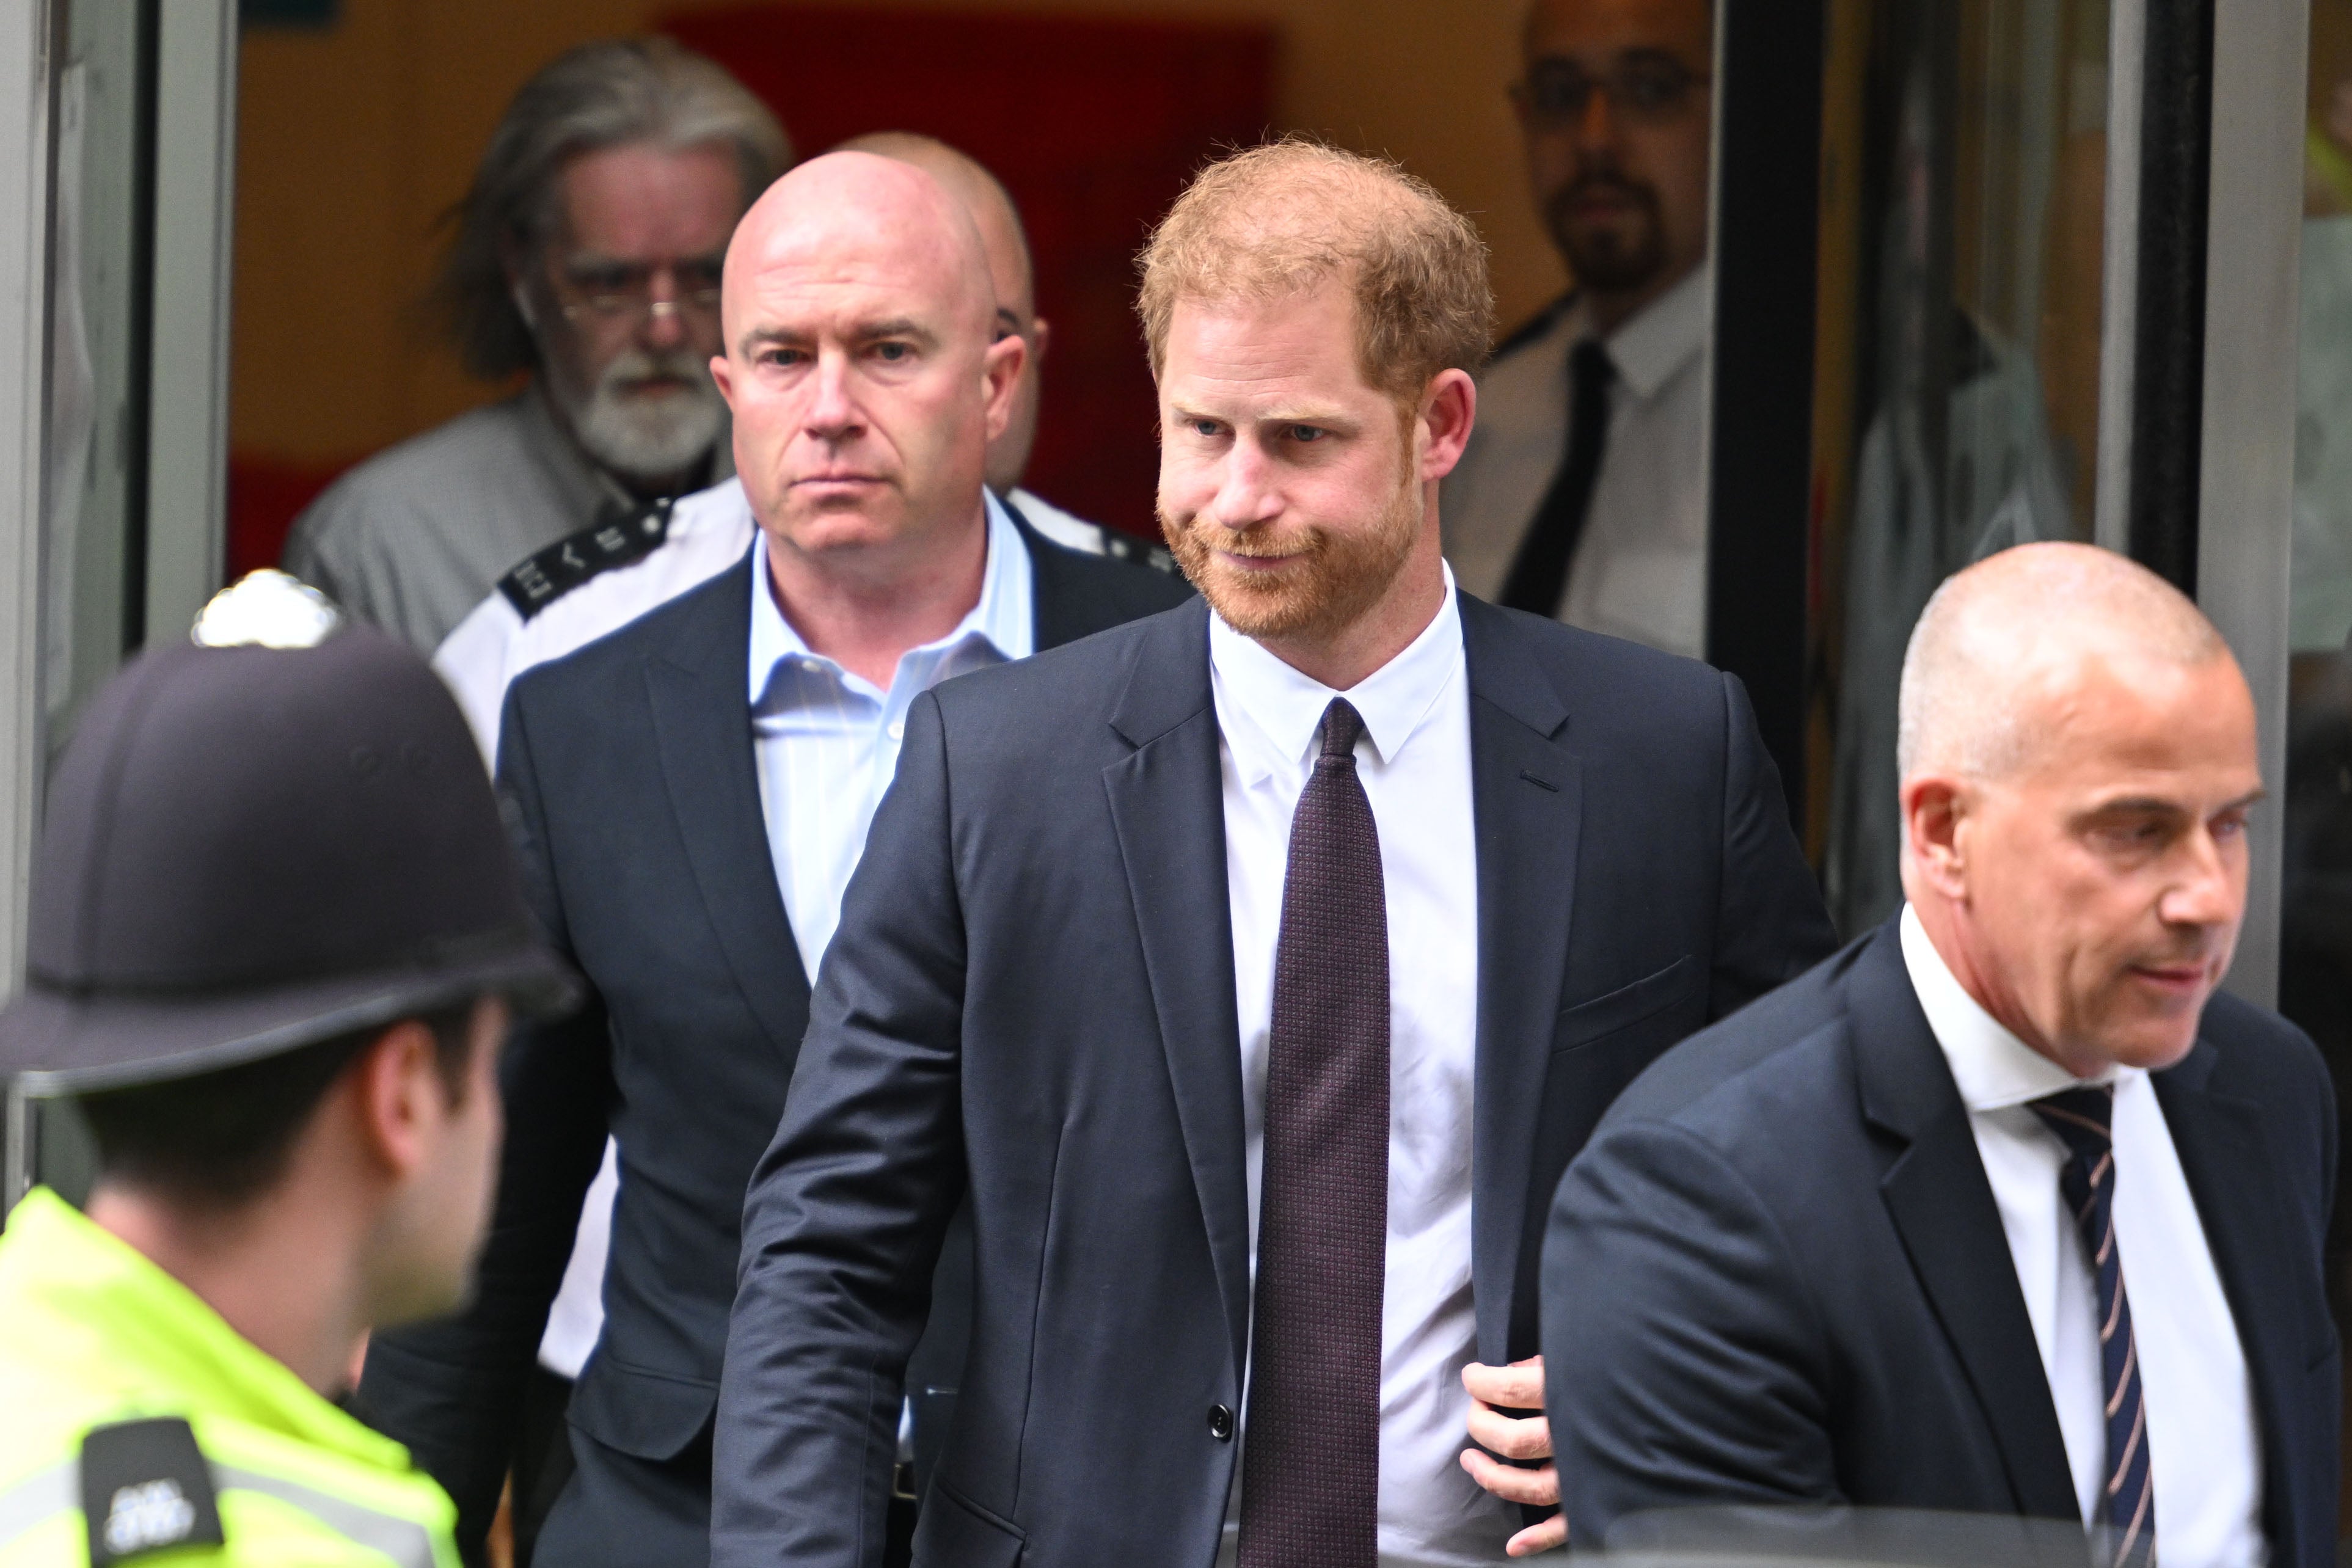 Prince Harry leavingthe High Court after giving evidence at the Mirror Group Phone hacking trial on Tuesday